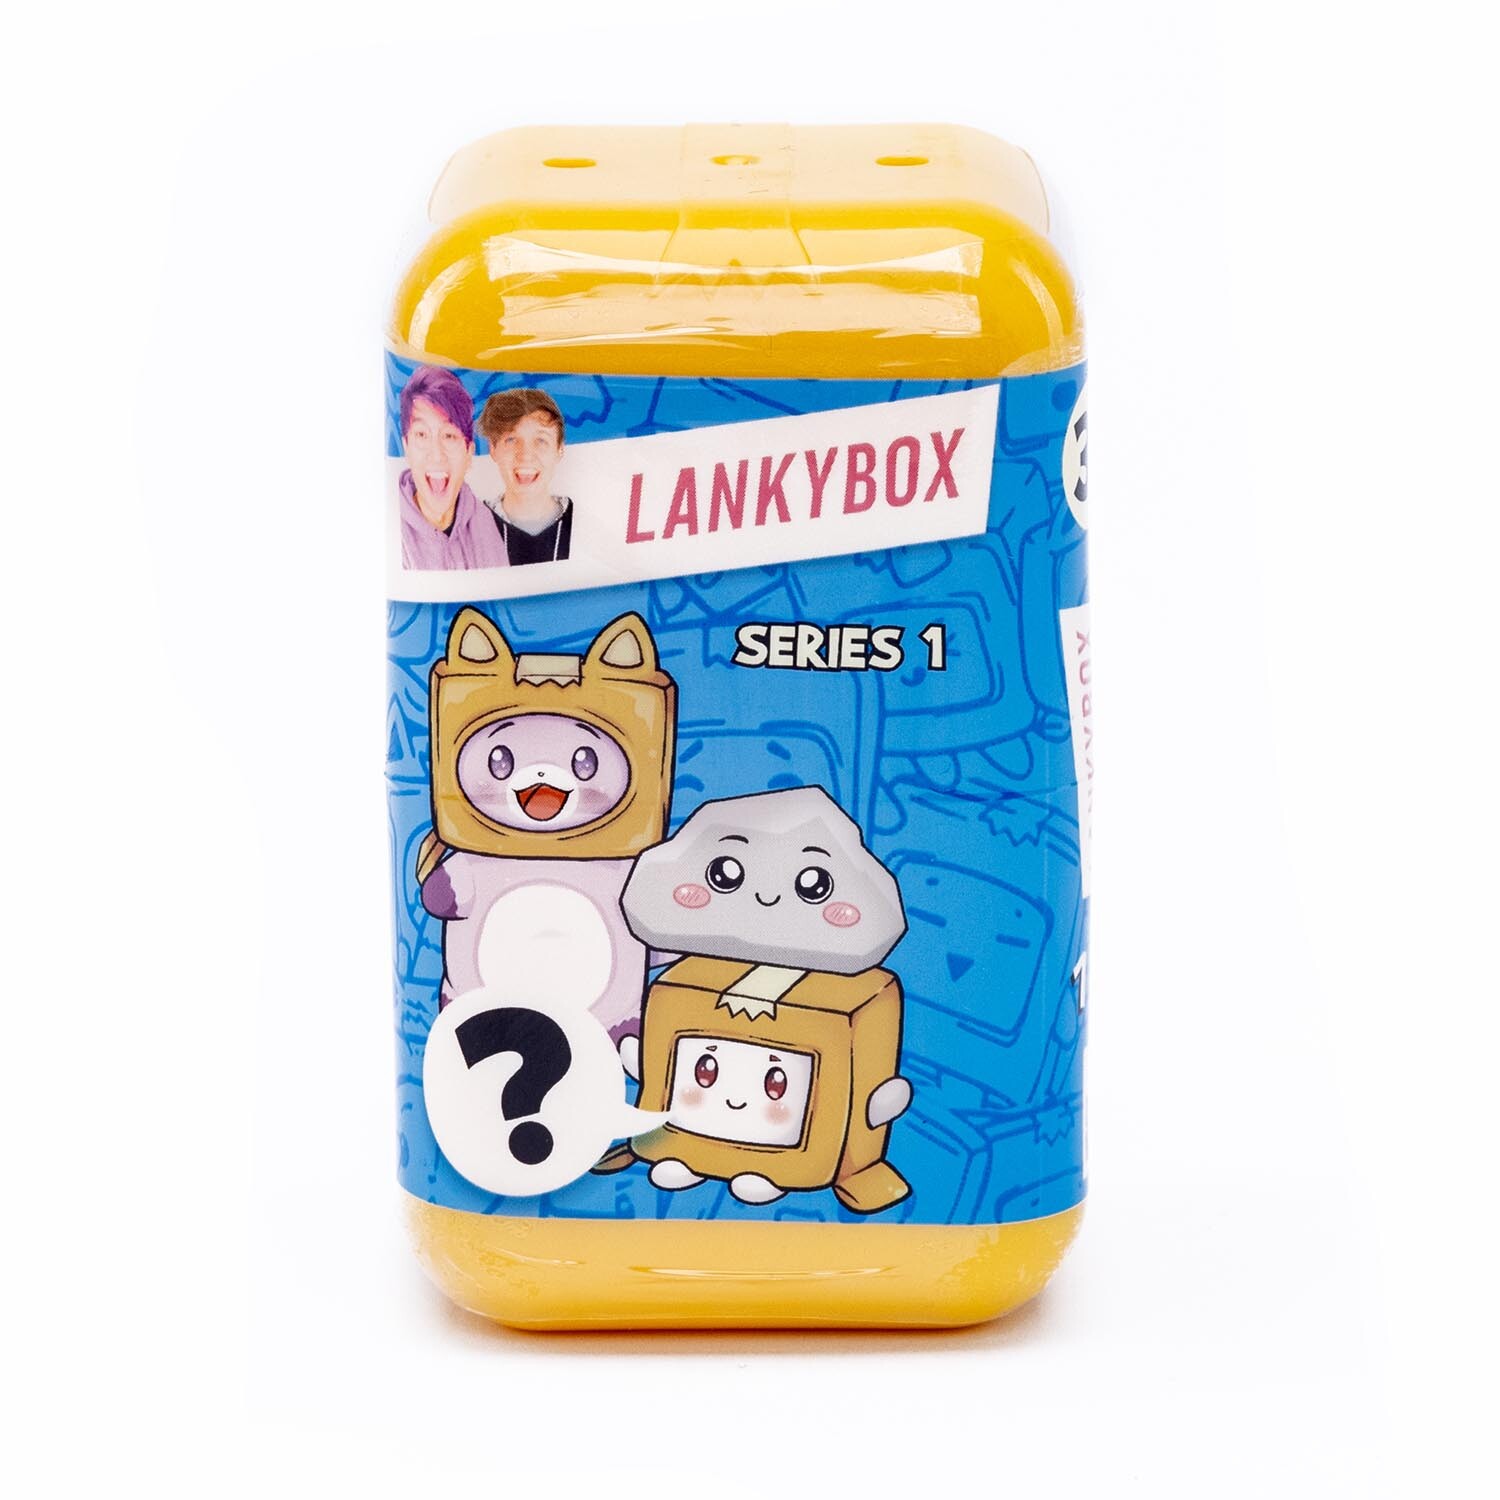 Single Lanky Box Mystery Squishies in Assorted styles Image 3